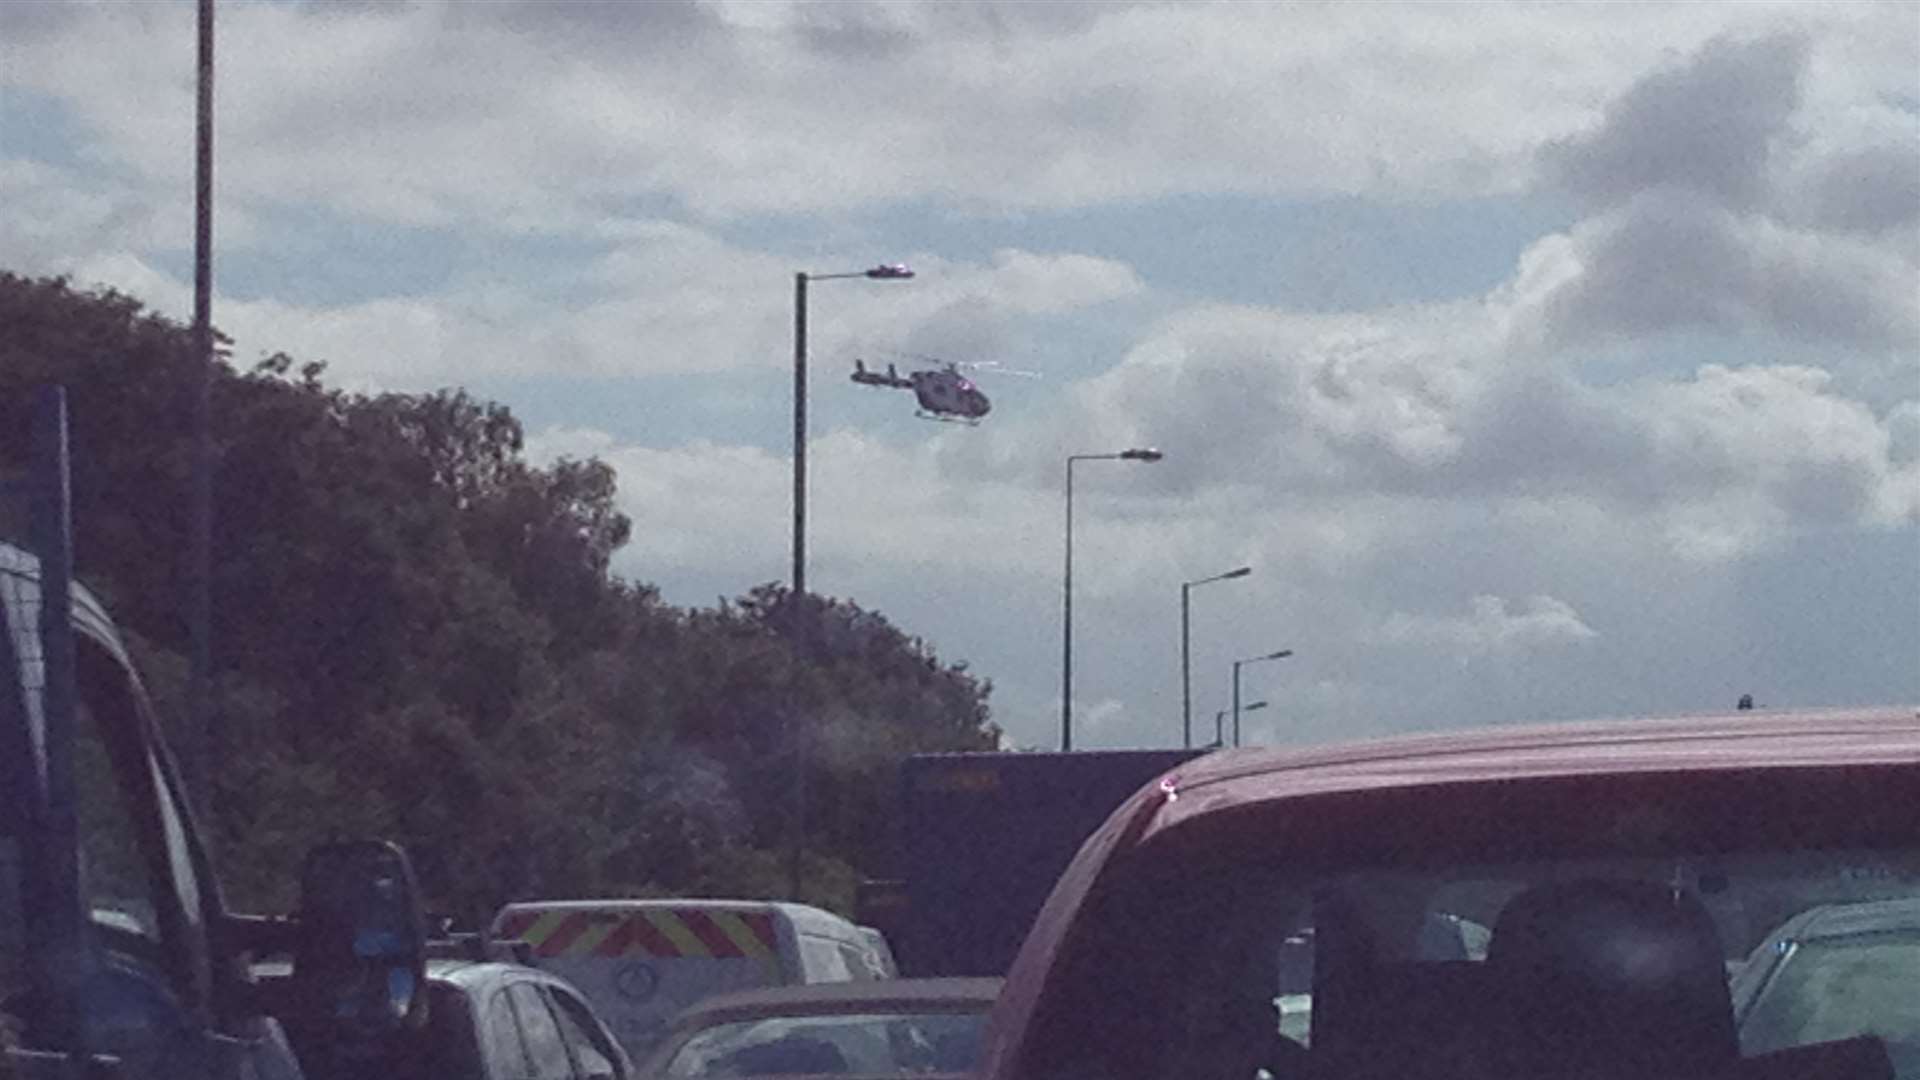 The air ambulance takes off after a man fell from a bridge over the A2